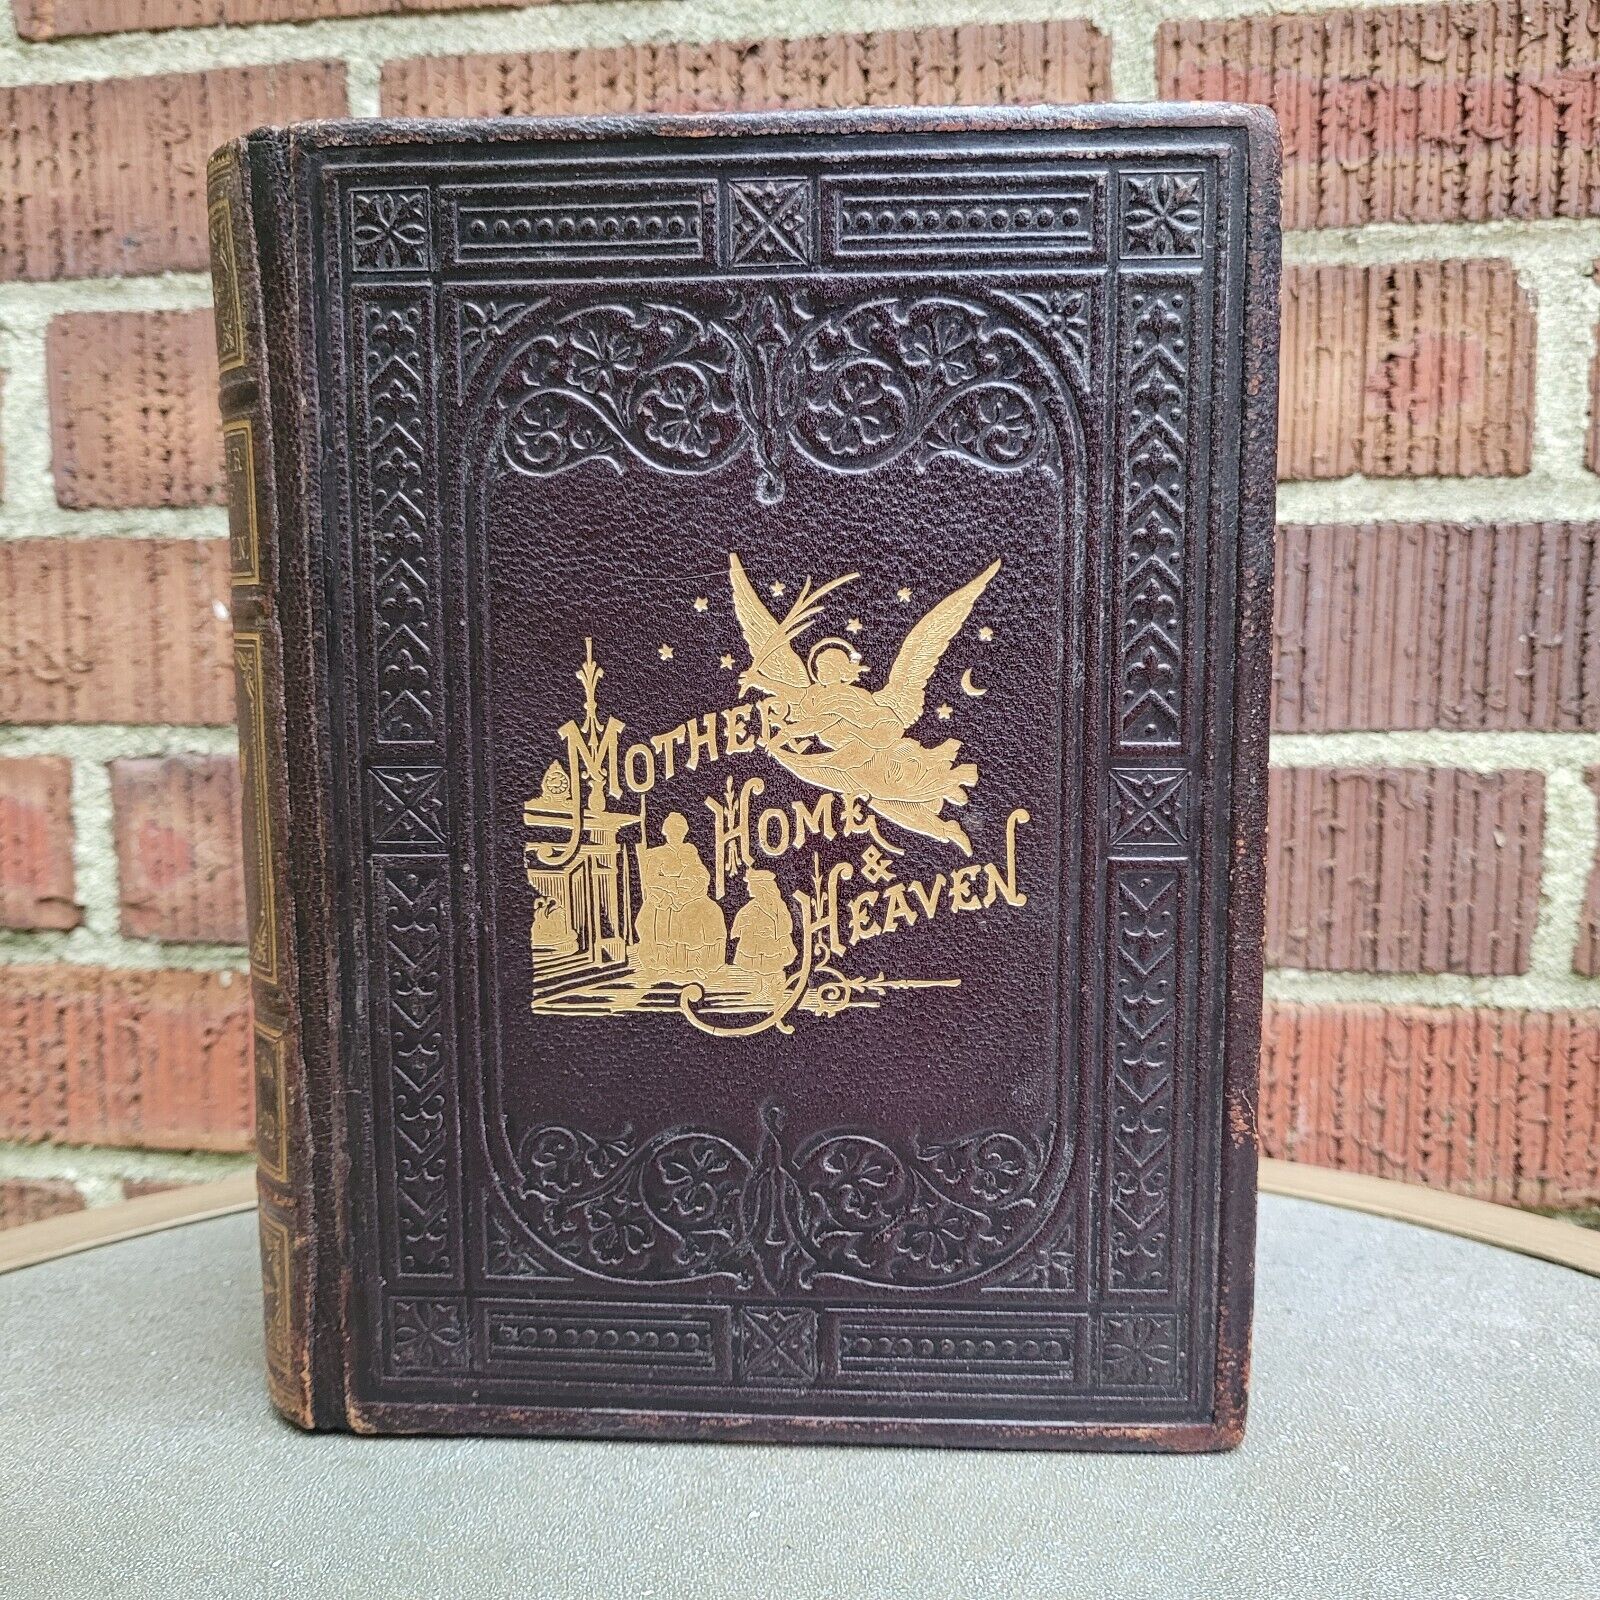 Golden Thoughts on Mother Home & Heaven  Leather Book 1882